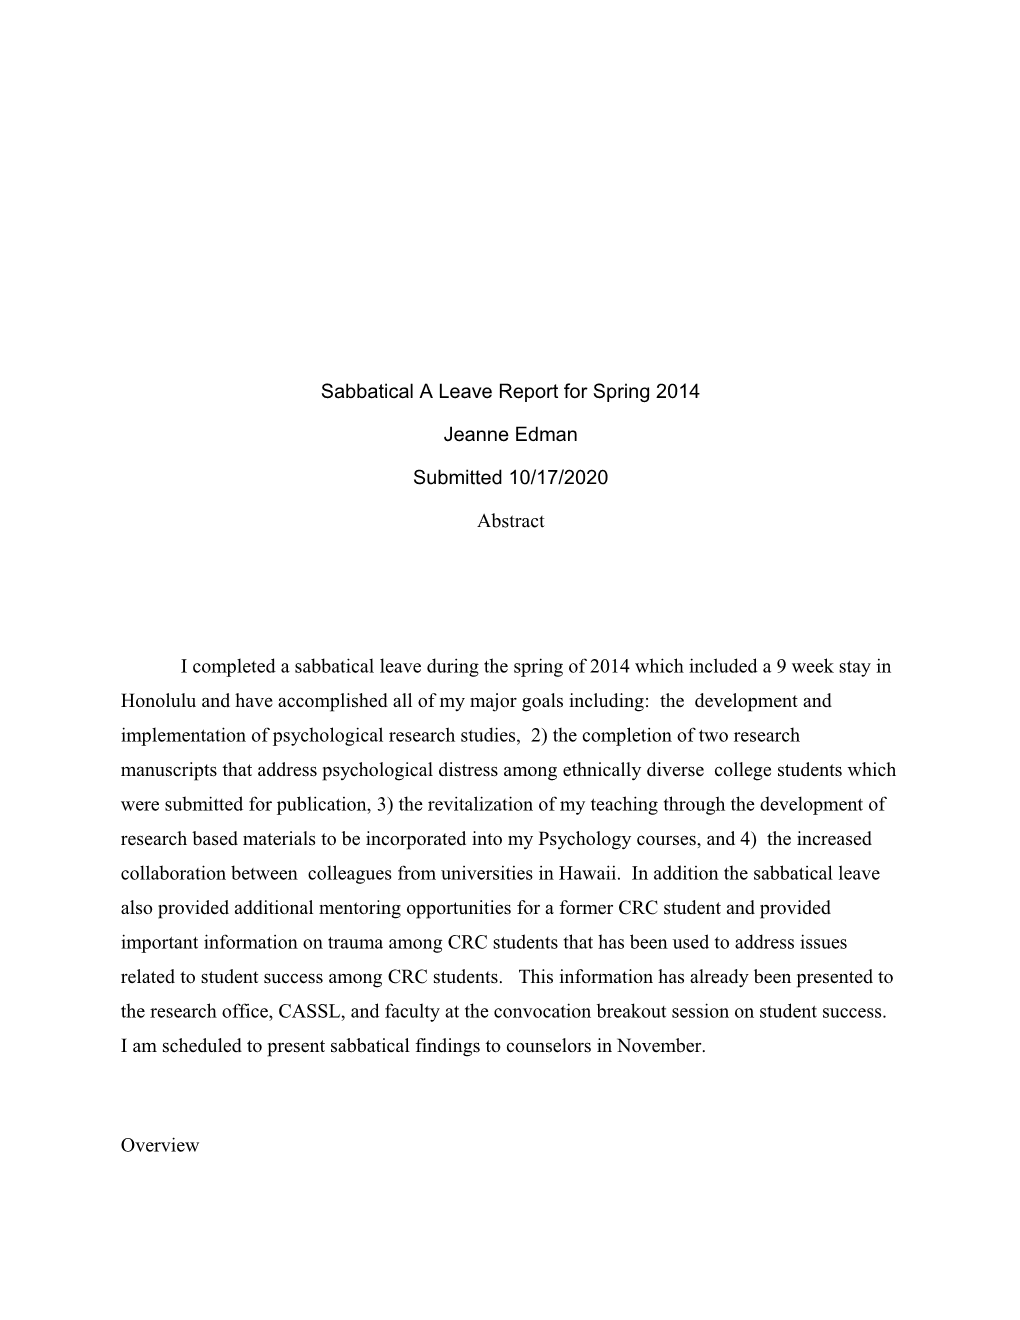 Sabbatical a Leave Report for Spring 2014